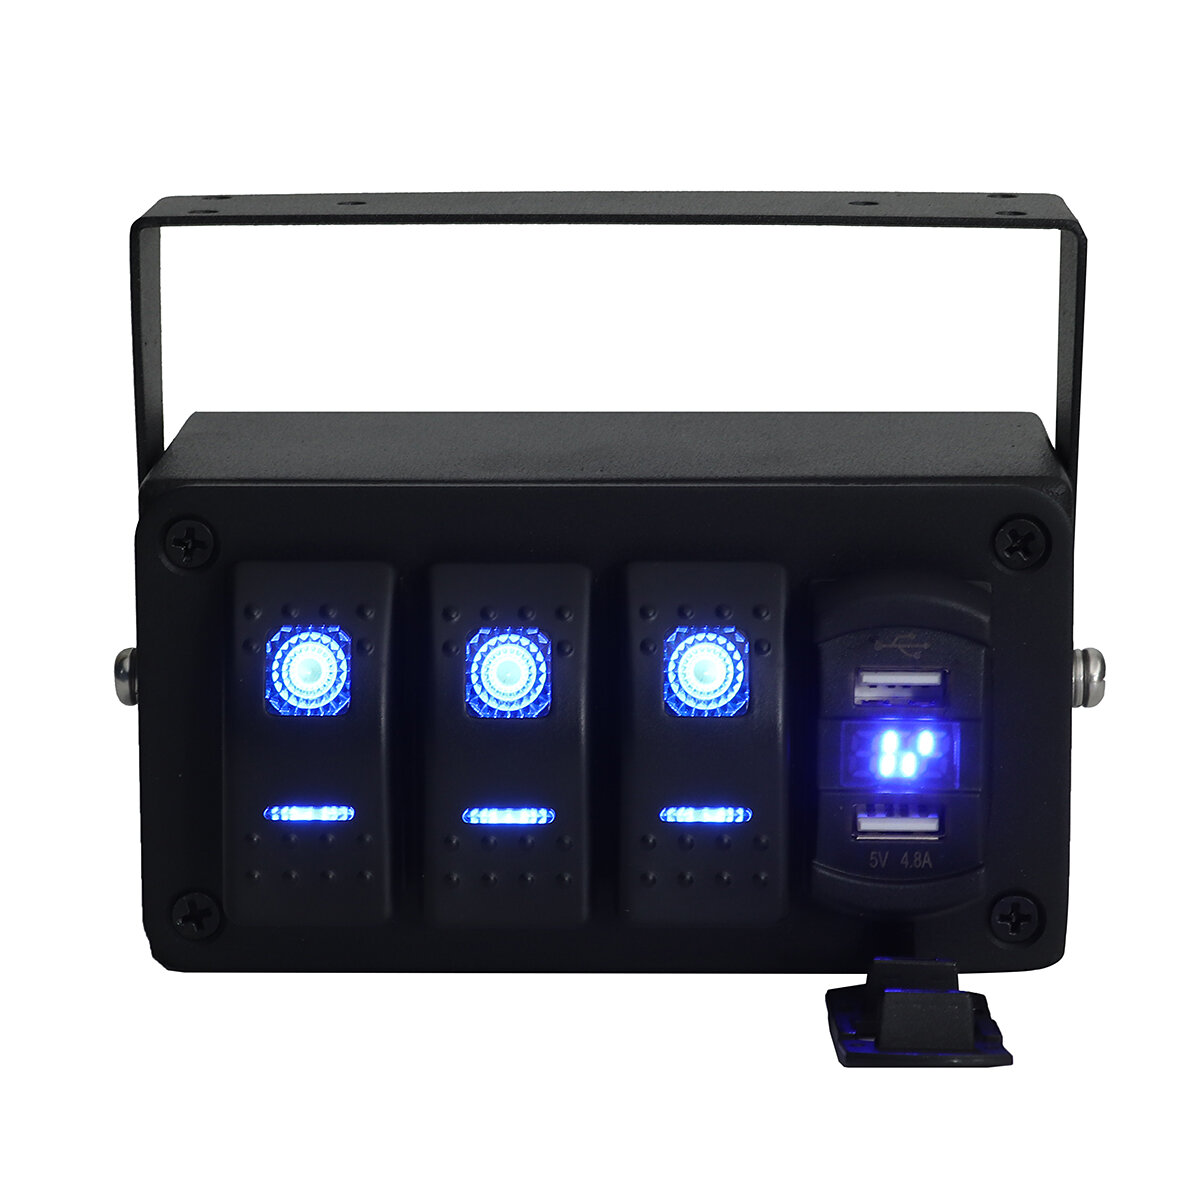 3 Gang Toggle Rocker Switch Panel USB LED-licht voor auto Marine Boot RV Truck